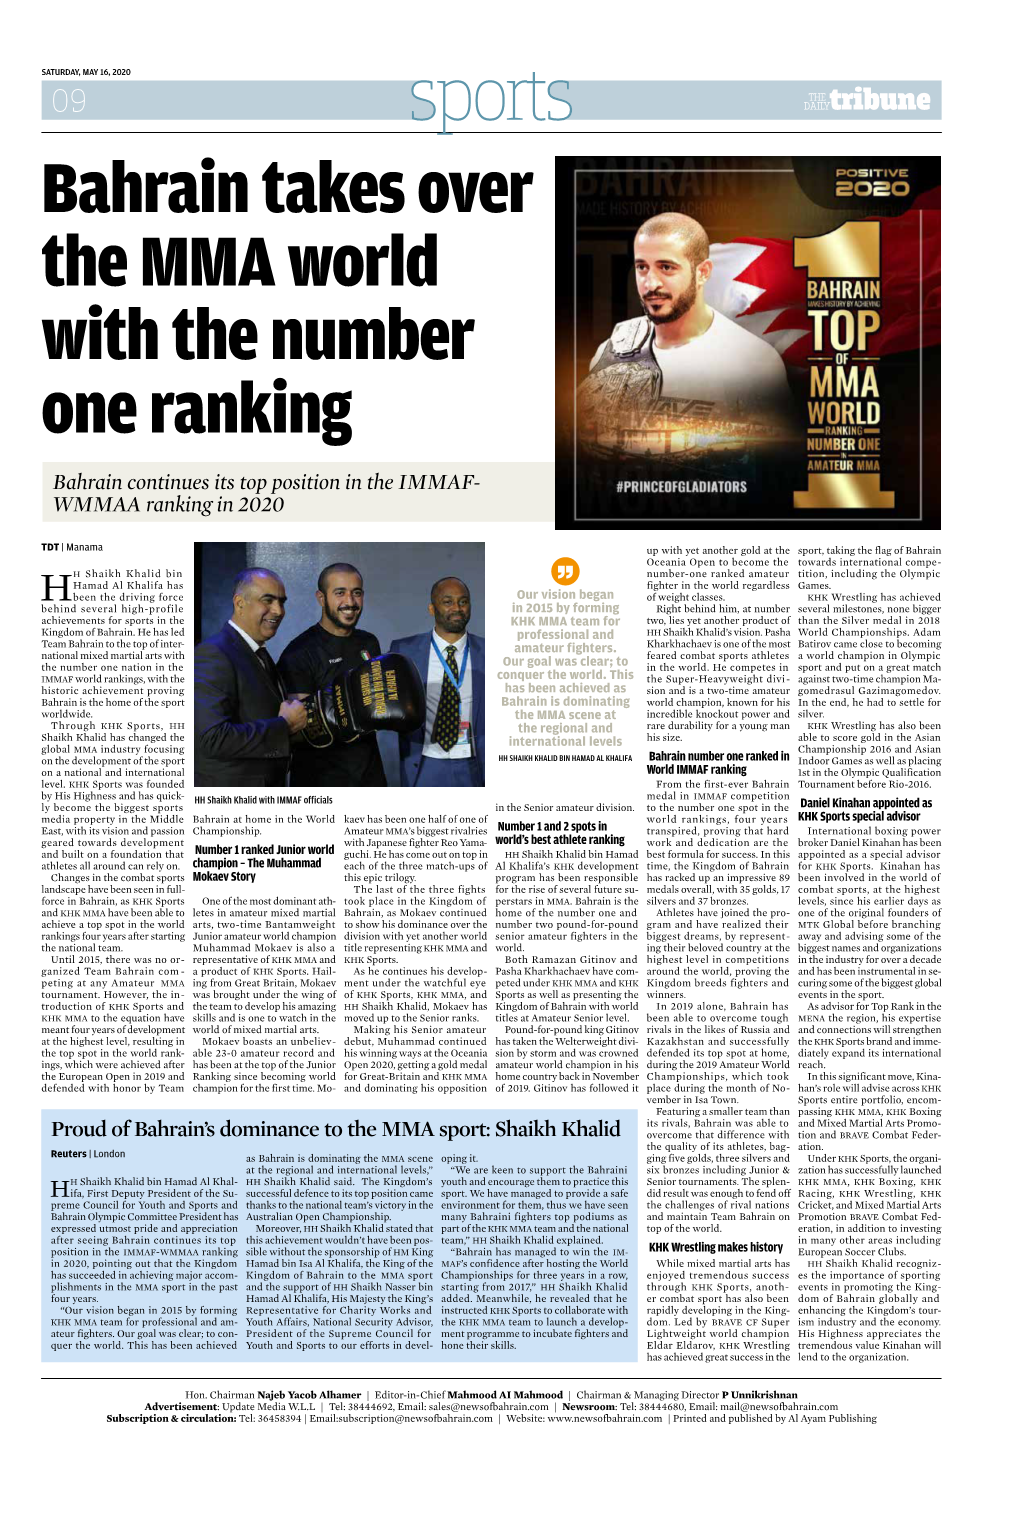 Bahrain Takes Over the MMA World with the Number One Ranking Bahrain Continues Its Top Position in the IMMAF- WMMAA Ranking in 2020